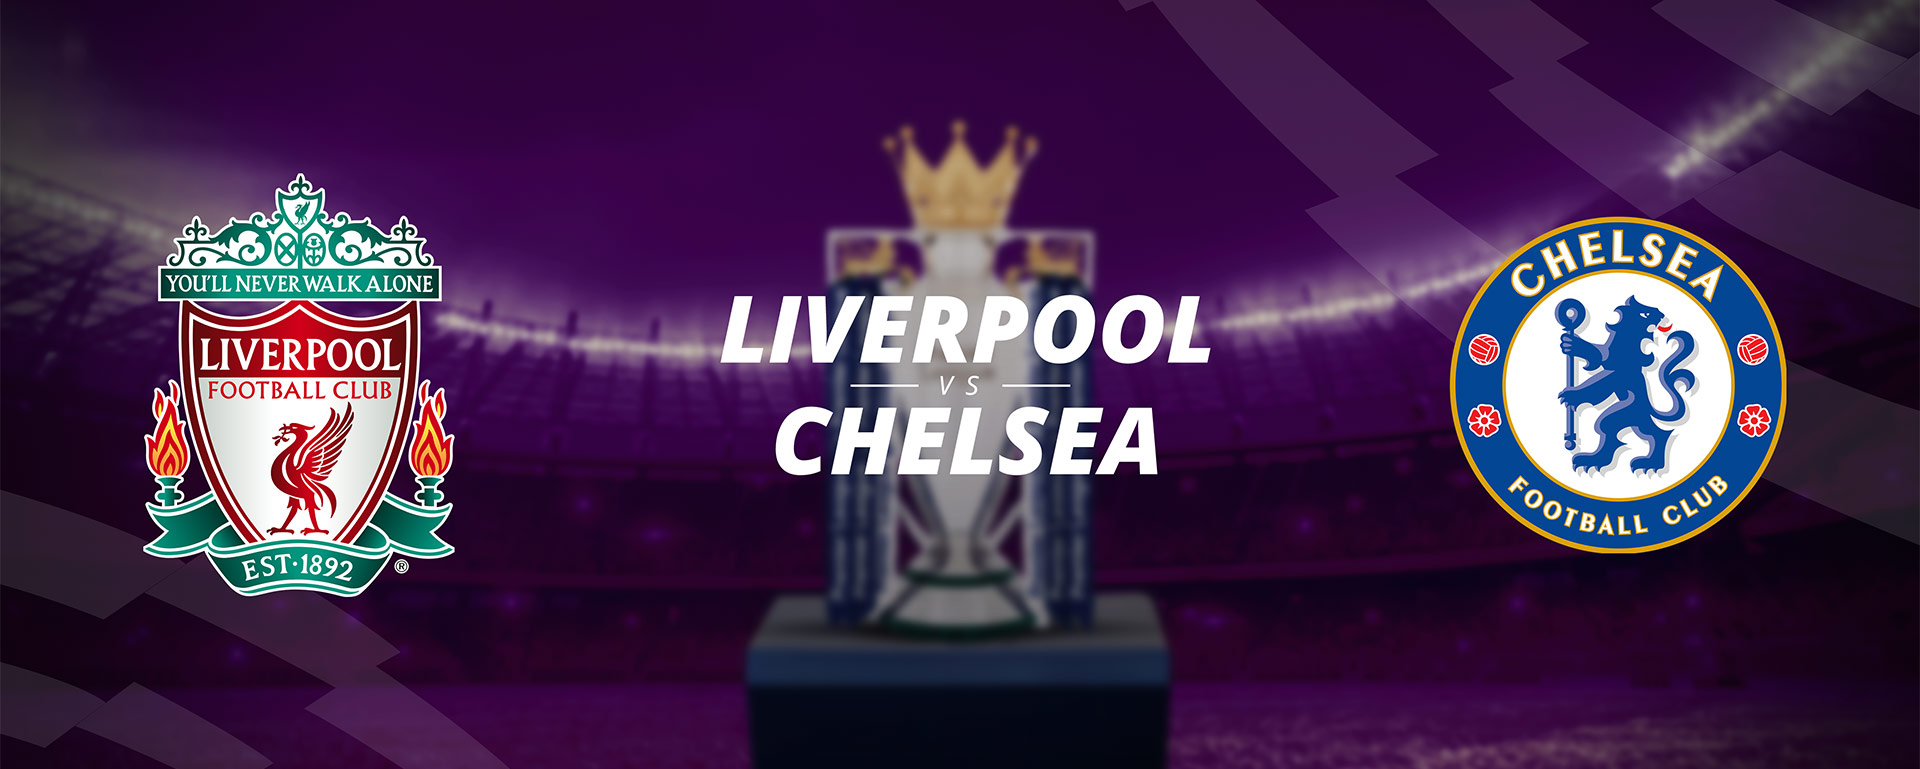 LIVERPOOL VS CHELSEA: BETTING PREVIEW